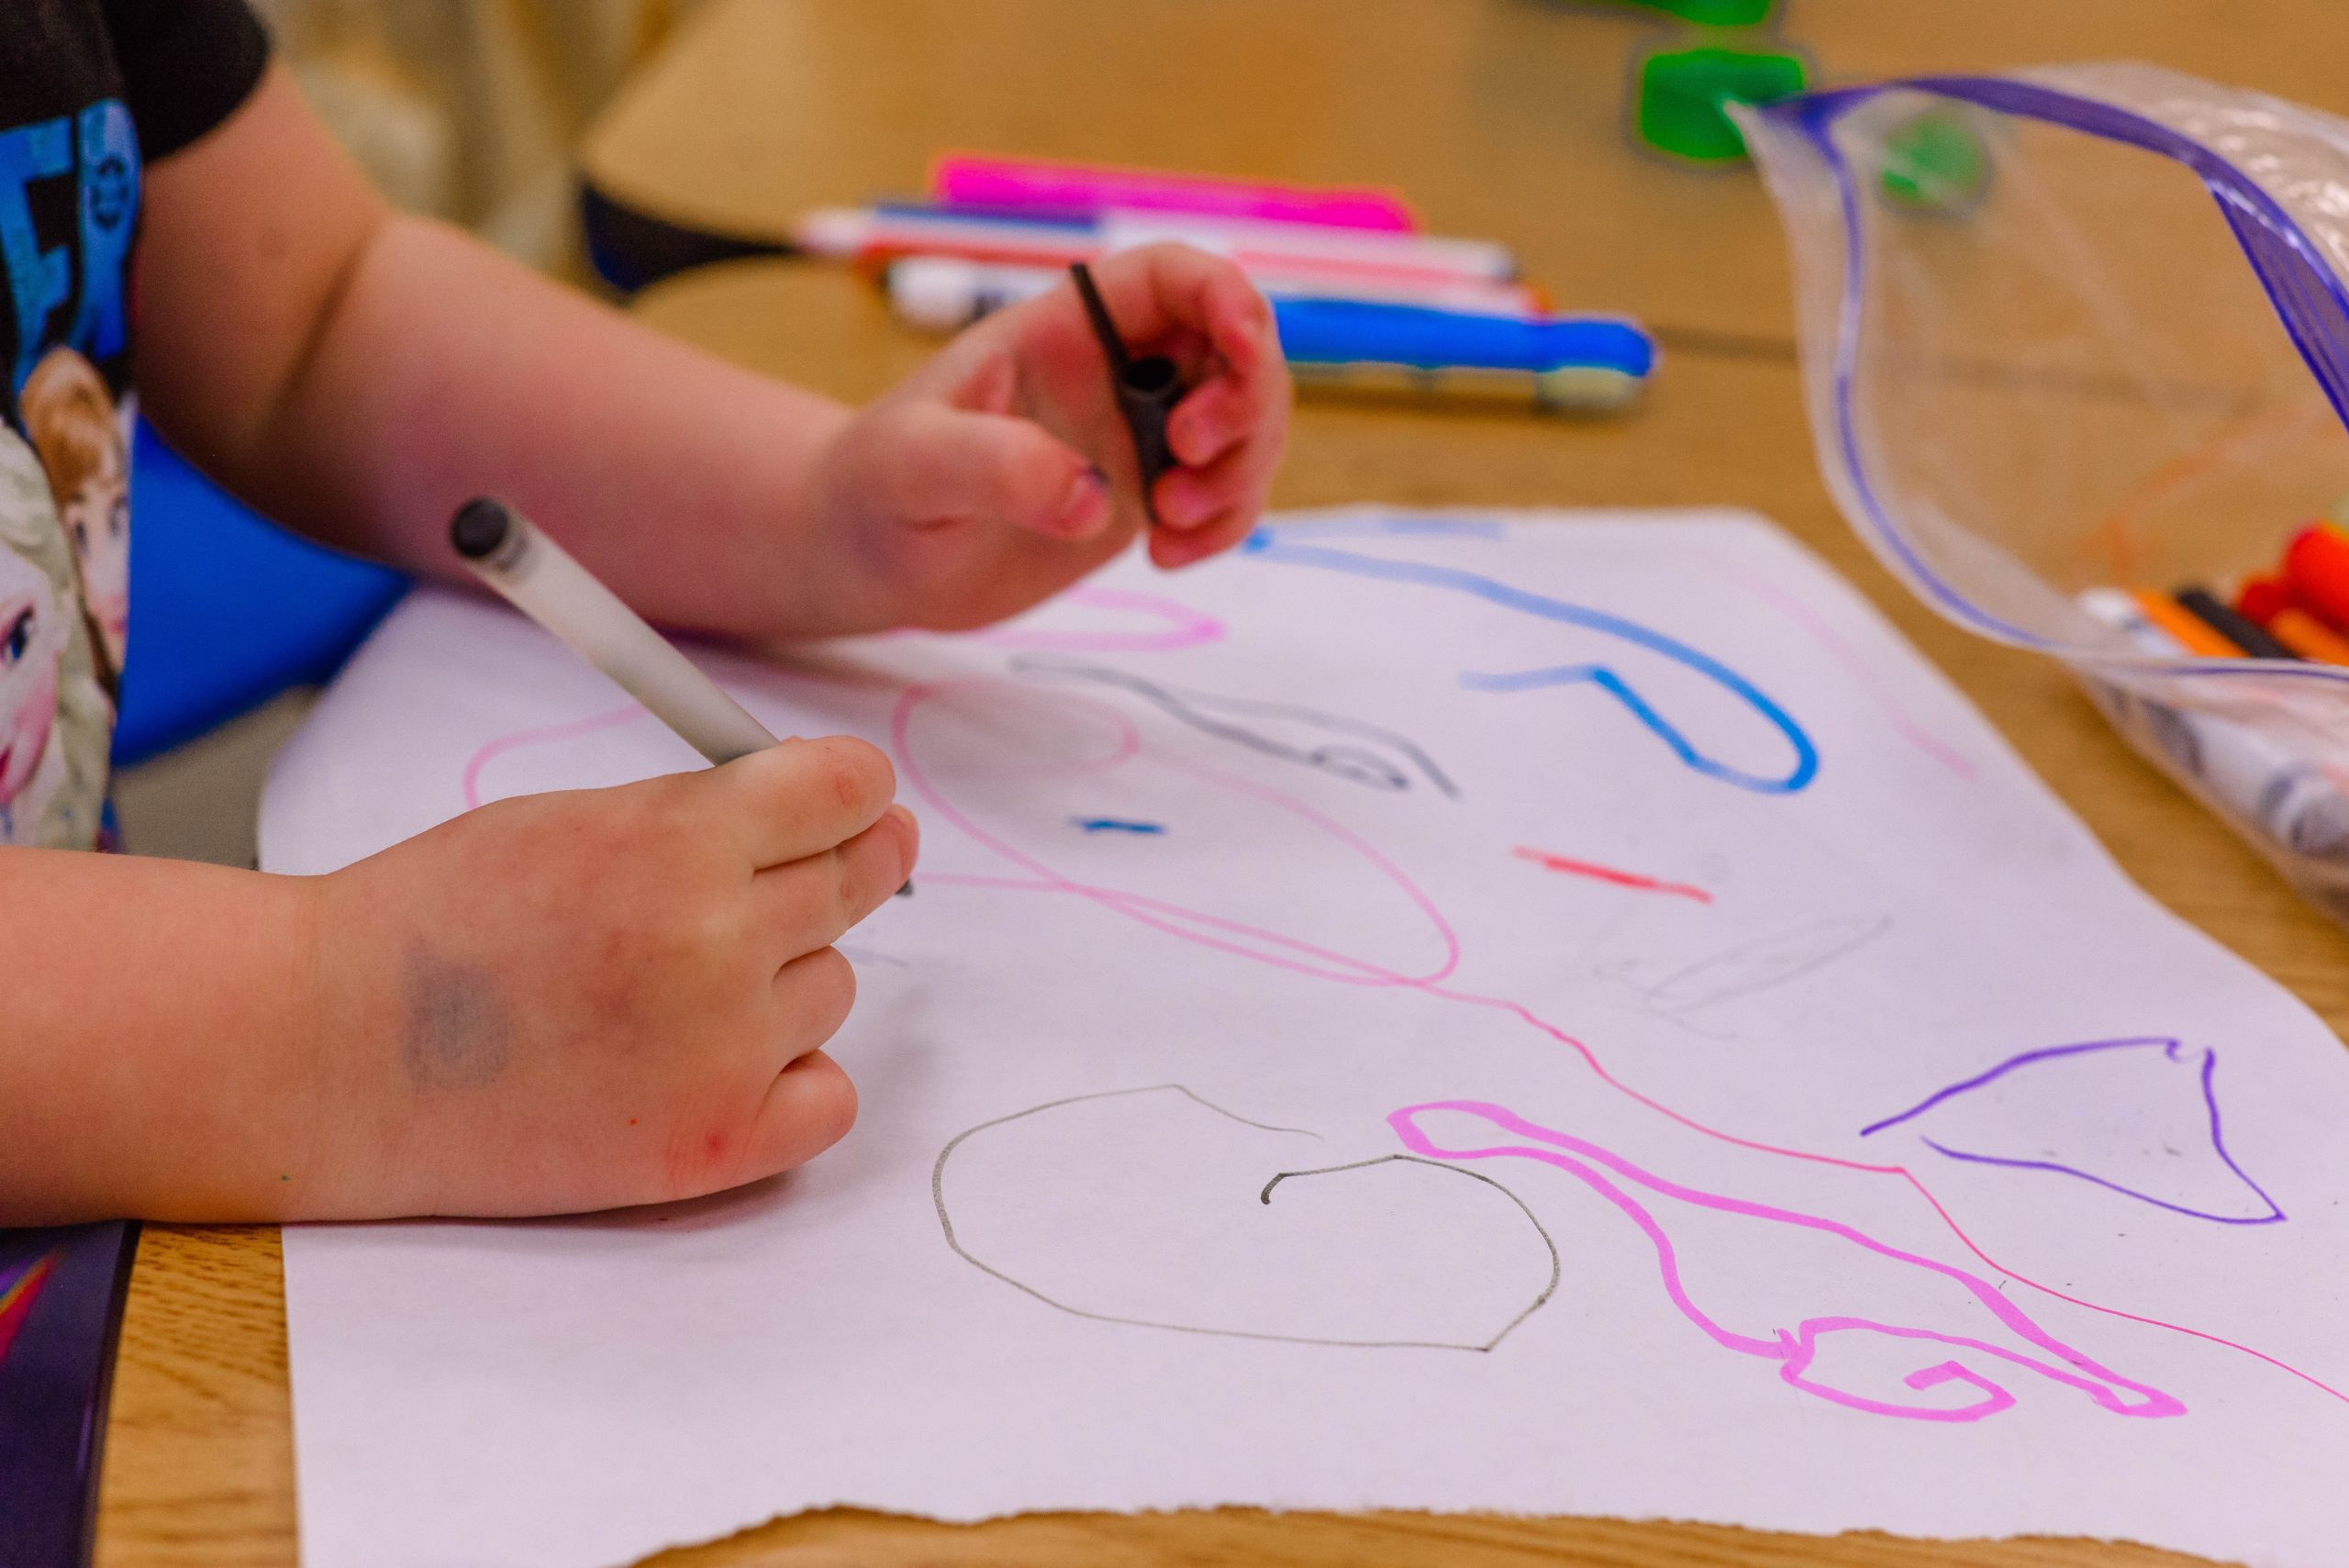 close up photo of a child's hands drawing colored shapes on a large scrap of paper